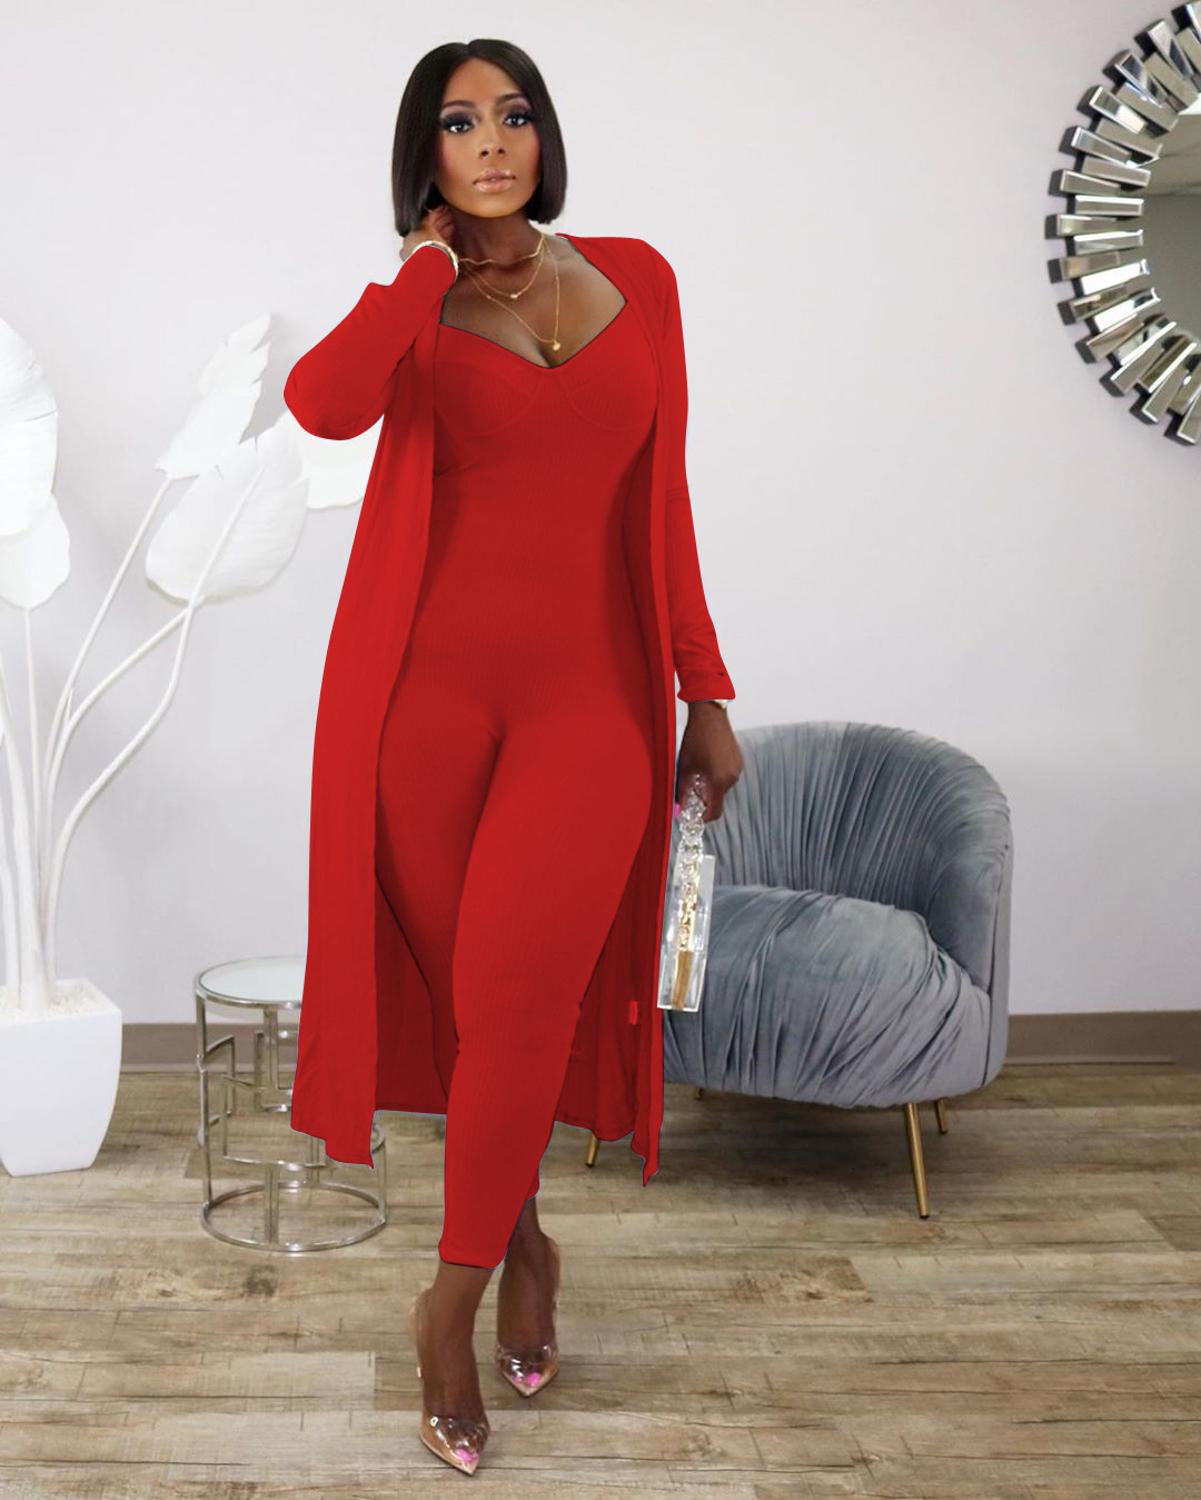 two piece set women 2 piece set women outfits long sleeve cardigans jumpsuit fall clothes for female 2 pieces sets outfits